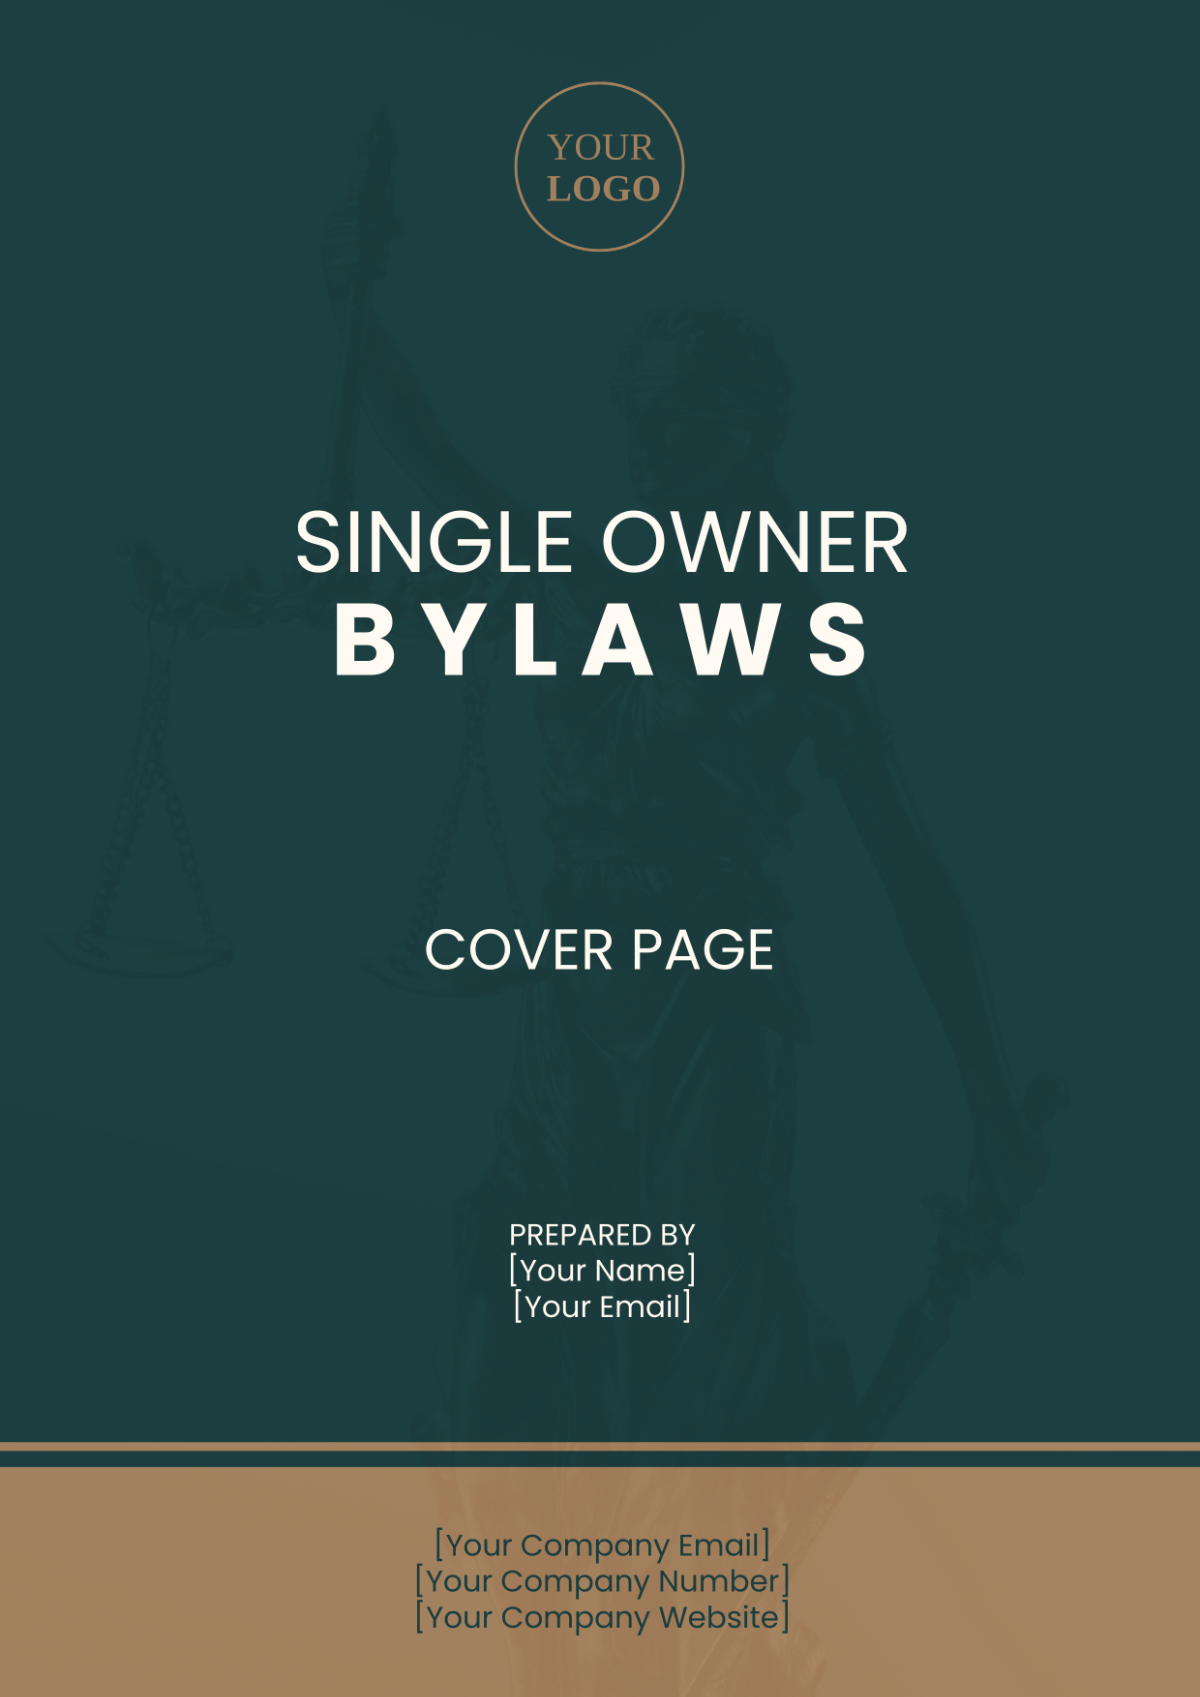 Single Owner Bylaws Cover Page